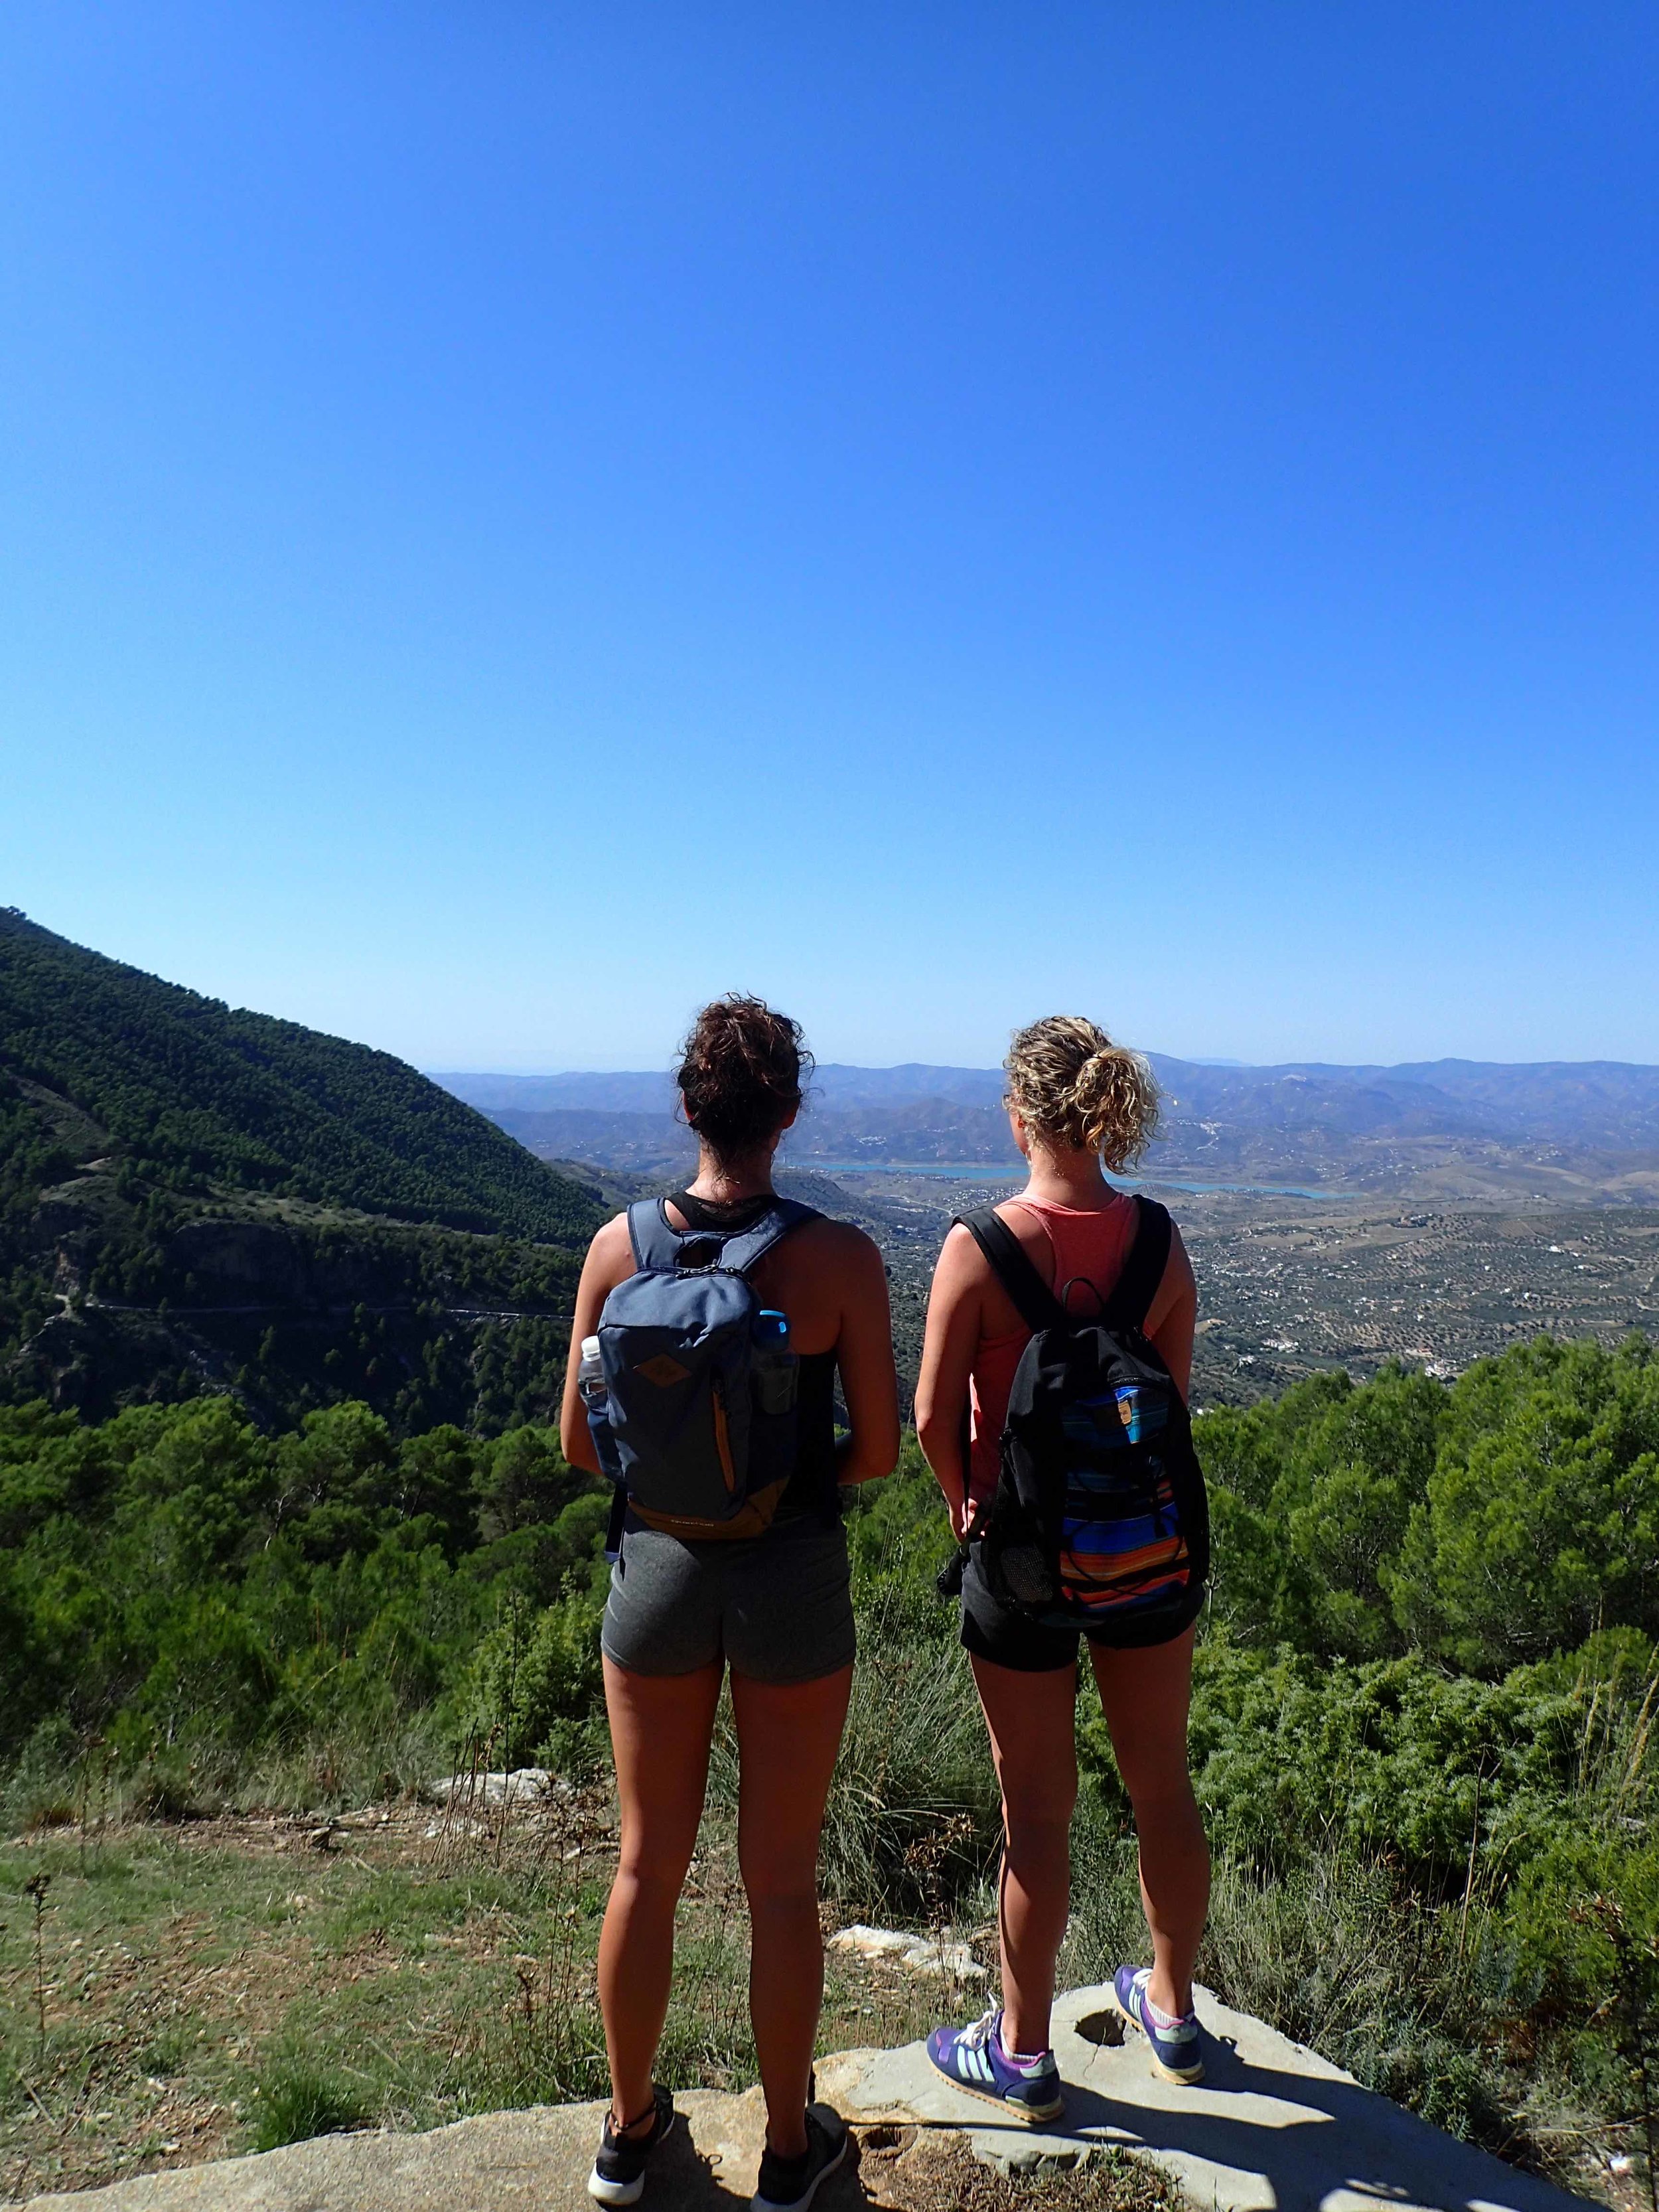 Sharing the amazing view at Yin Yang Yoga retreat in the Malaga mountains in Spain with Jane Bakx Yoga (Copy) (Copy)